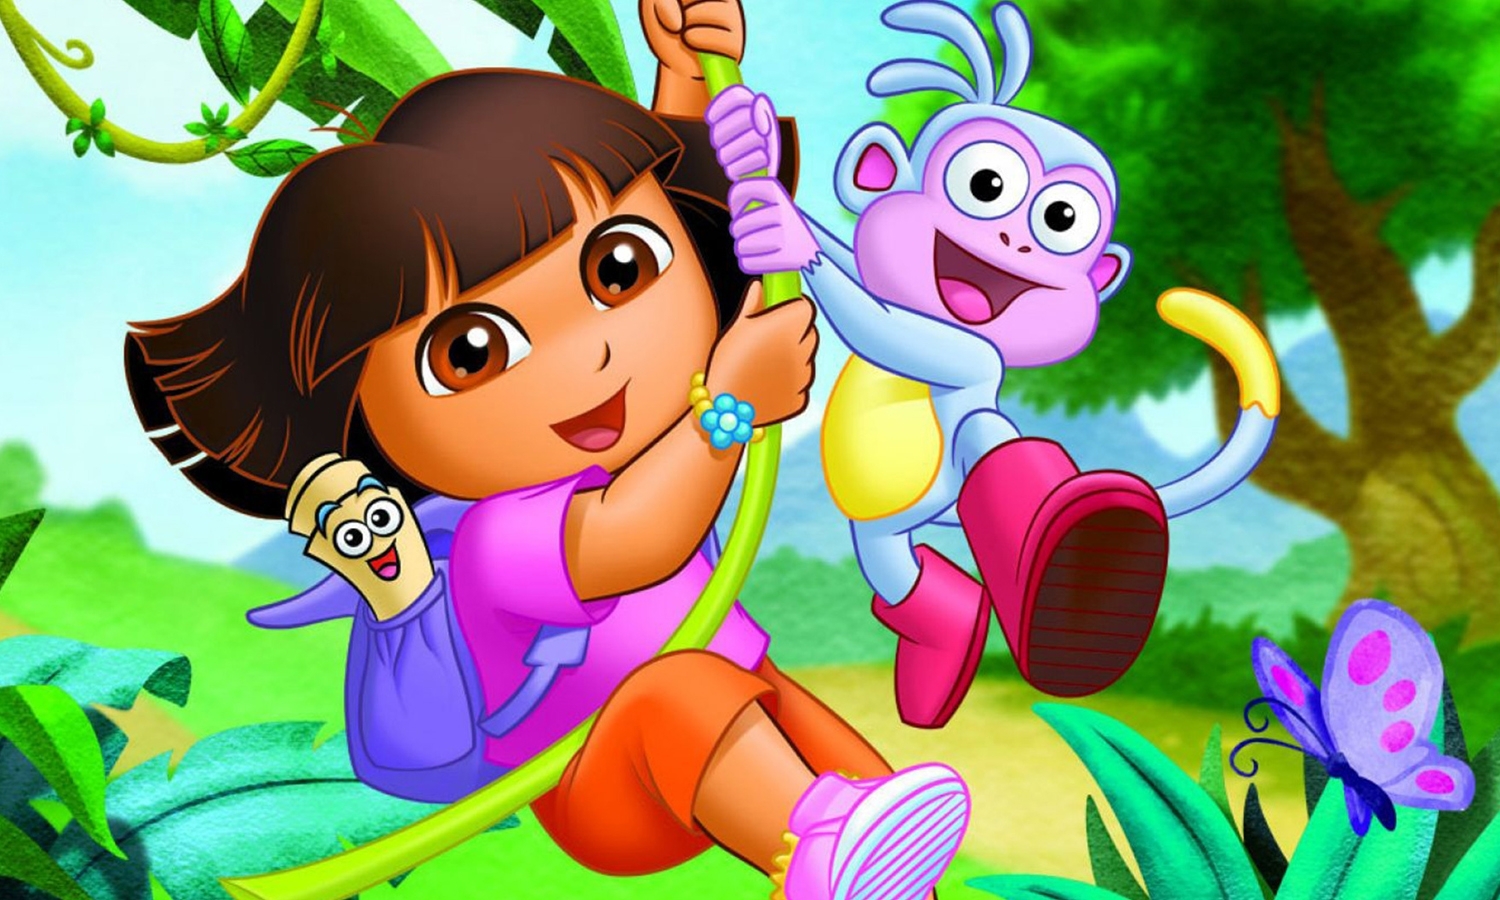 Michael Bay is producing a live-action Dora the Explorer movie